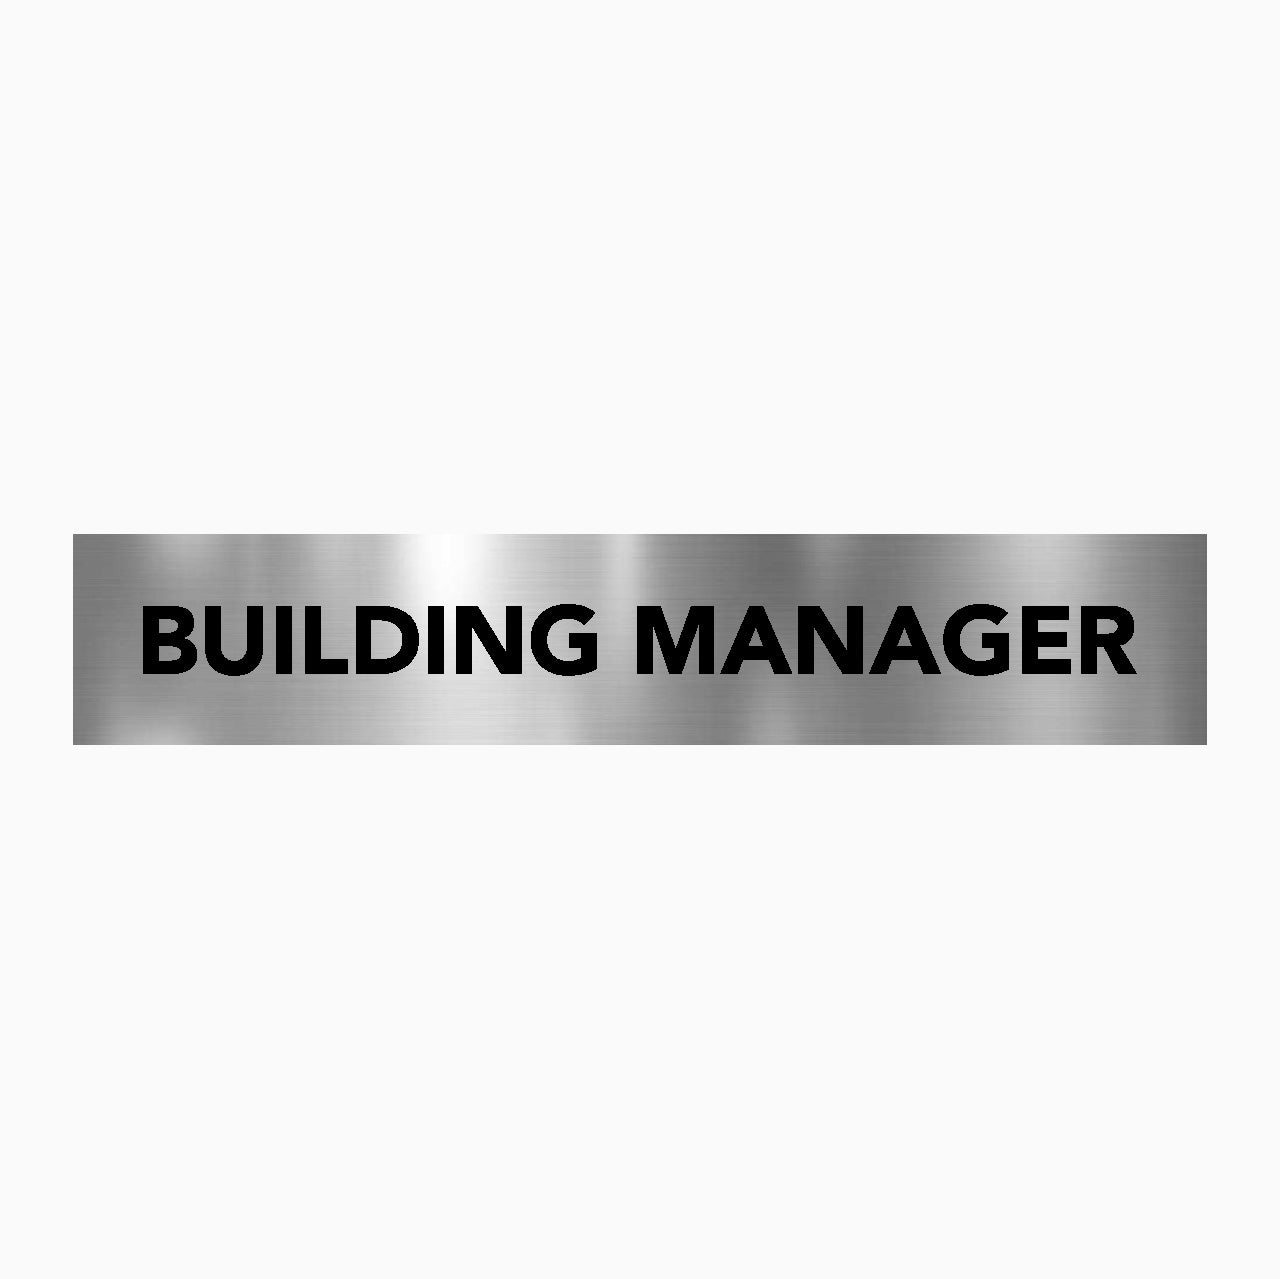 BUILDING MANAGER SIGN